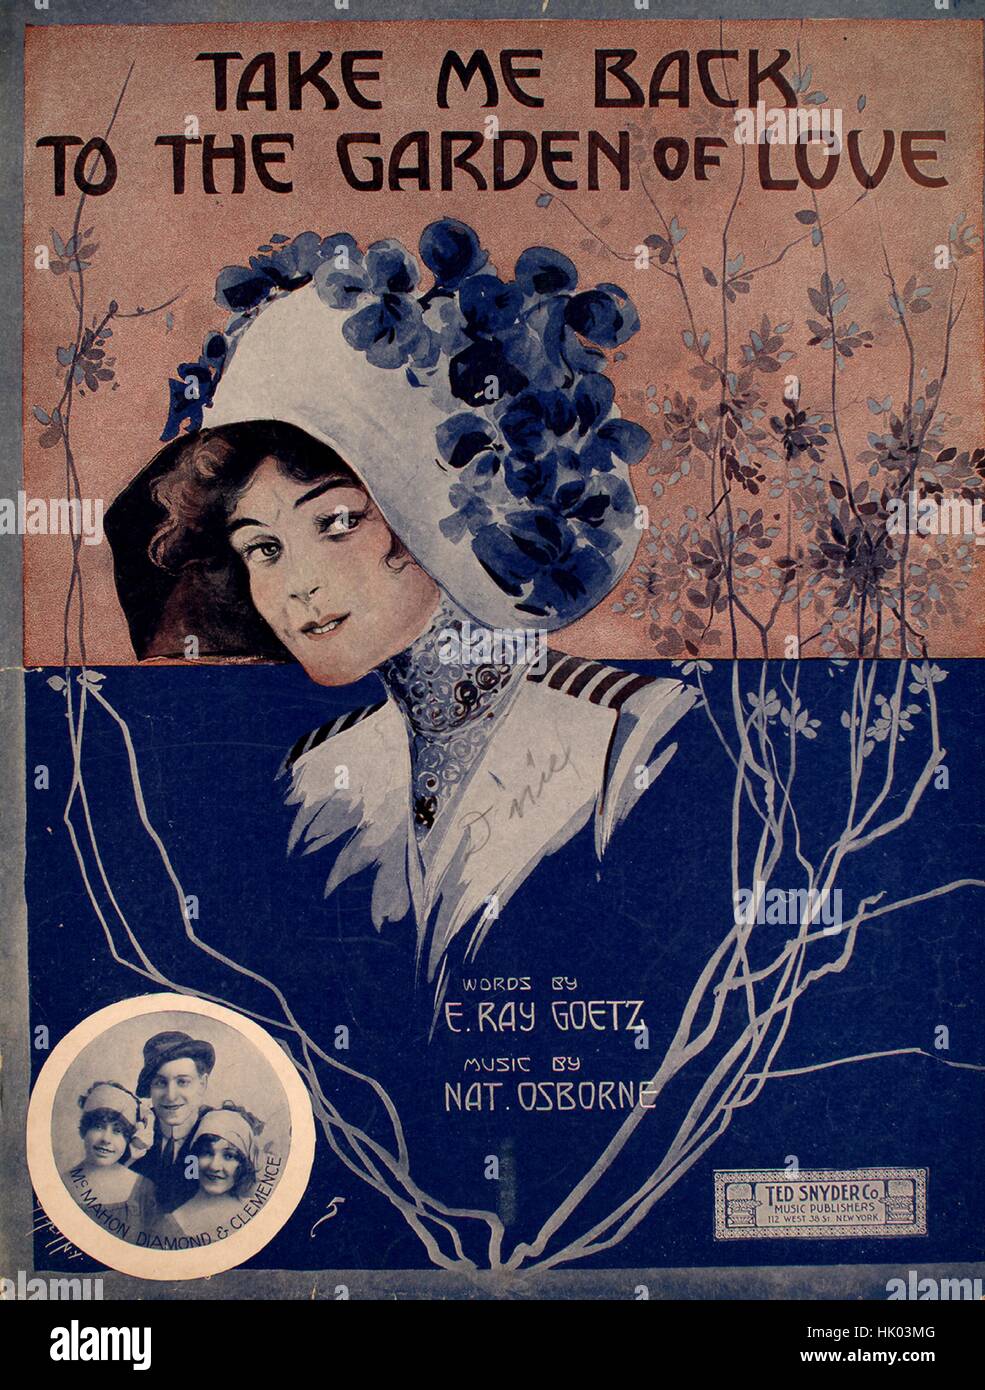 Sheet Music Cover Image Of The Song Take Me Back To The Garden Of